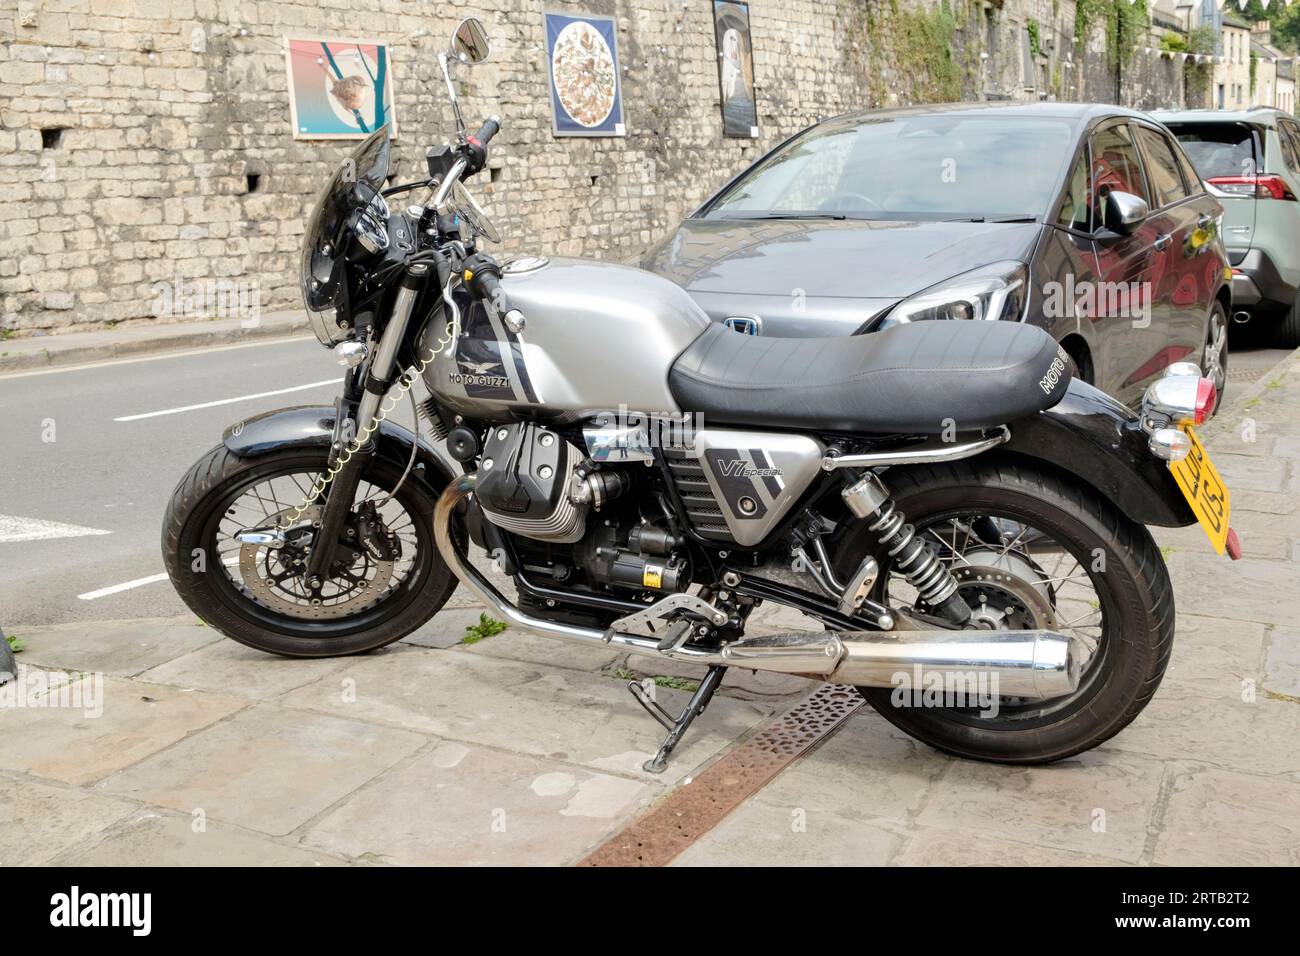 A 2013 model Motto Guzzi V7 special v-twin motorcycle or motorbike in Bath somerset UK Stock Photo